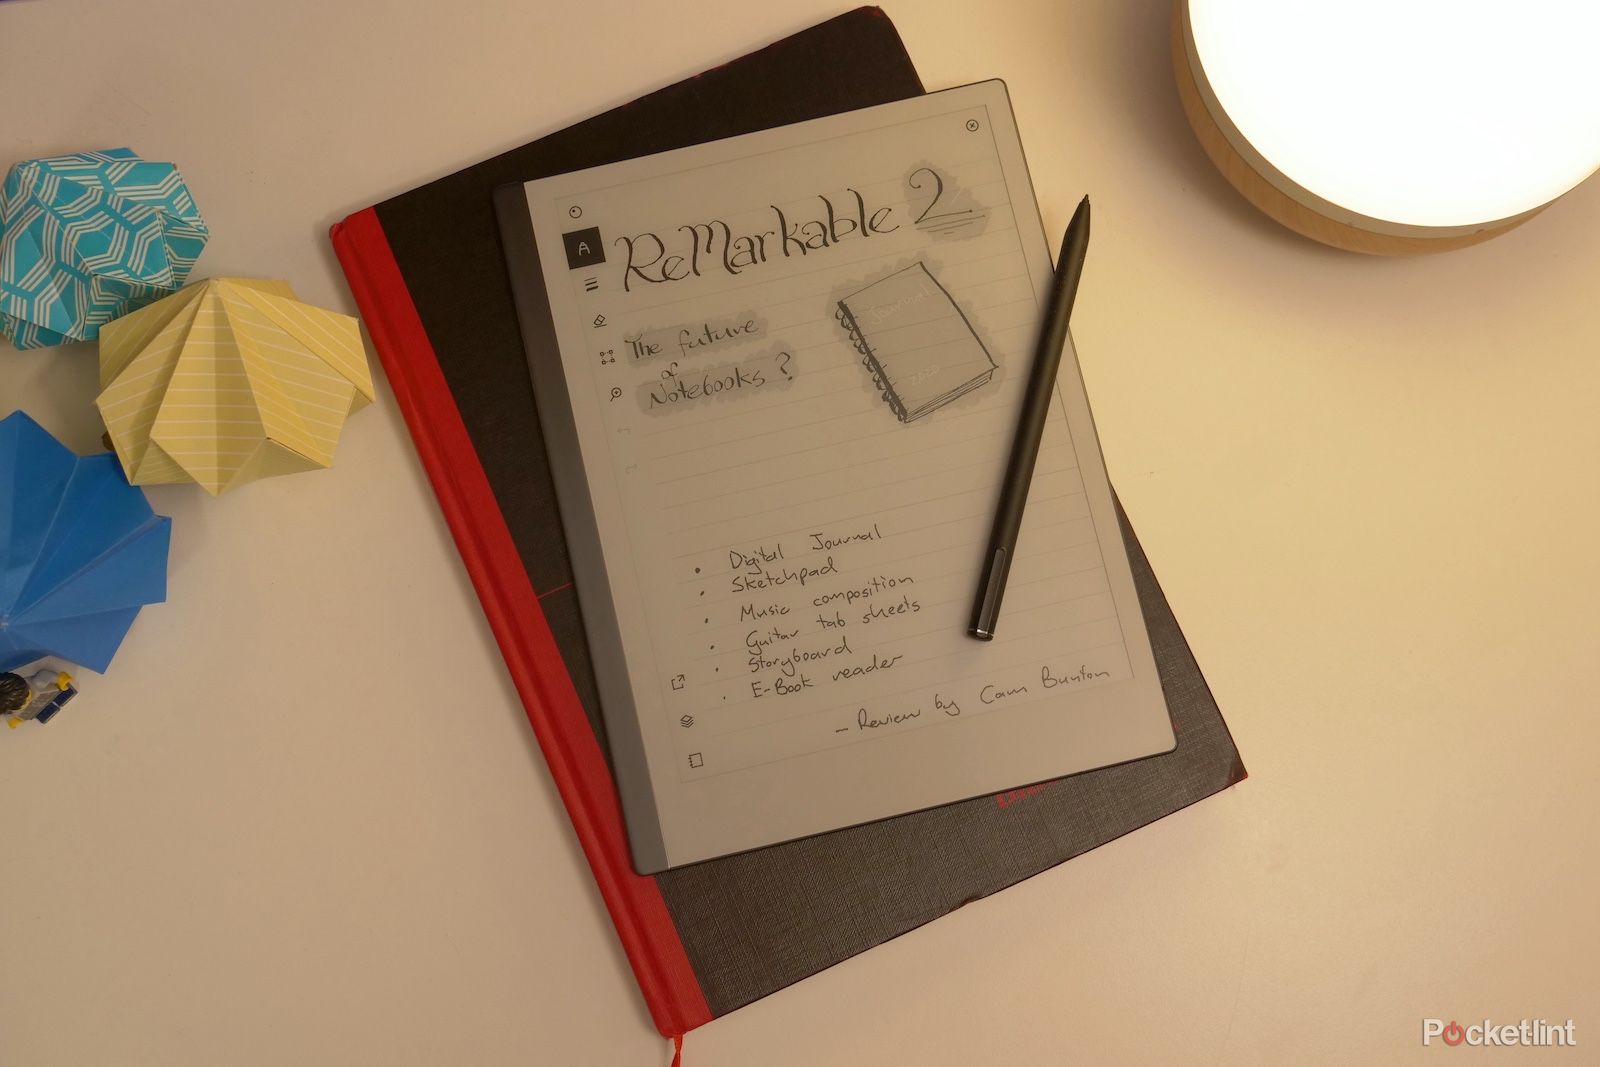 best-note-taking-tablets:-compare-the-remarkable-2,-kindle-scribe,-and-more